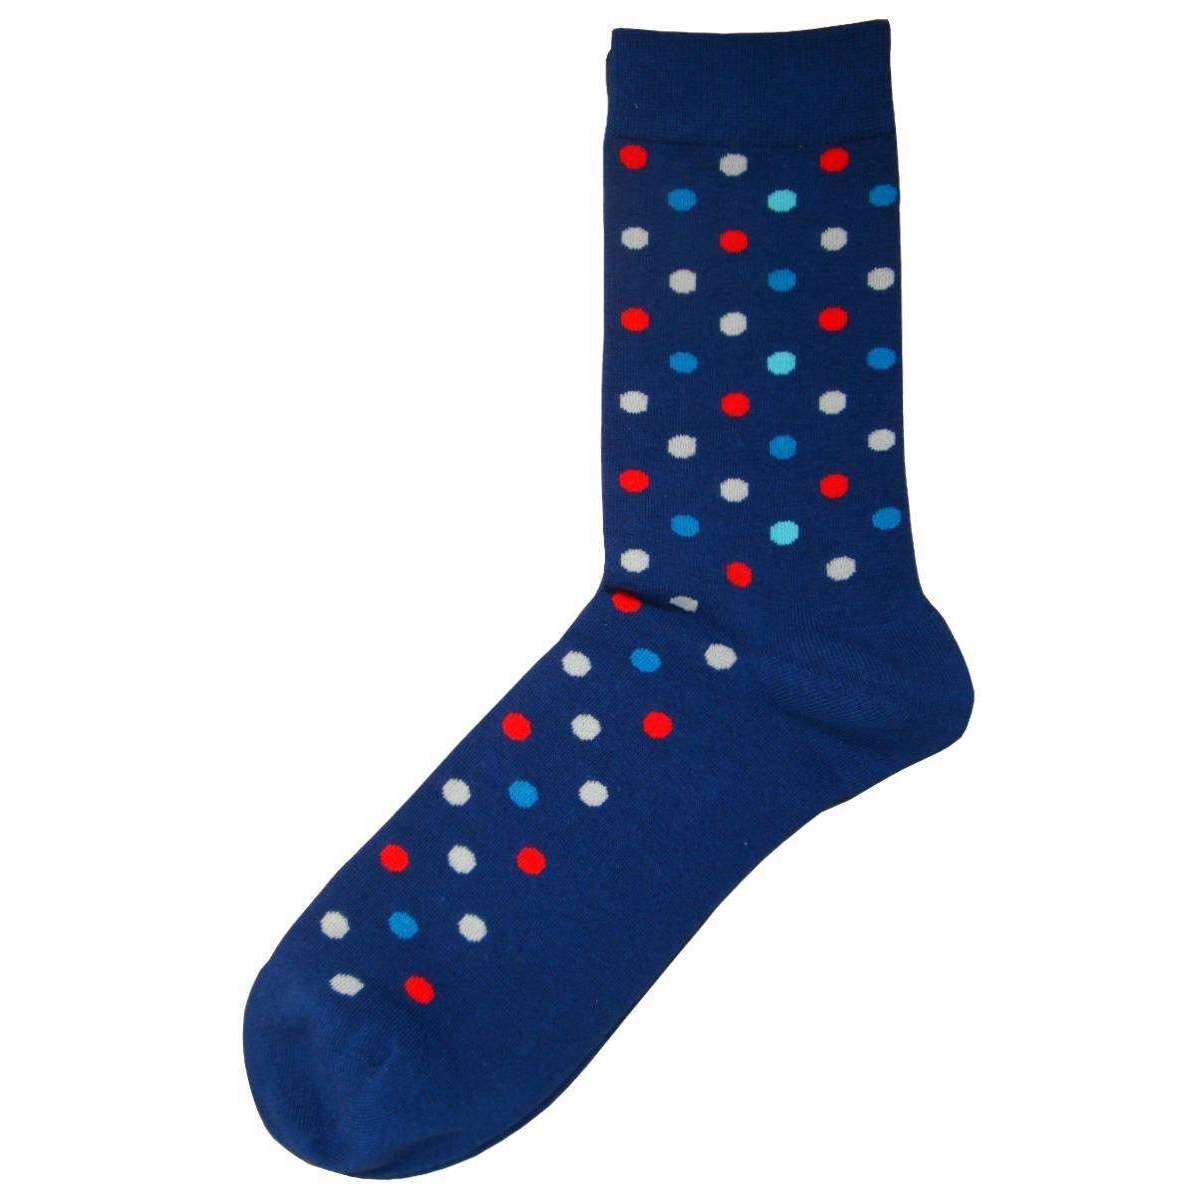 Bassin and Brown Multi Spot Socks - Navy/Blue/Red